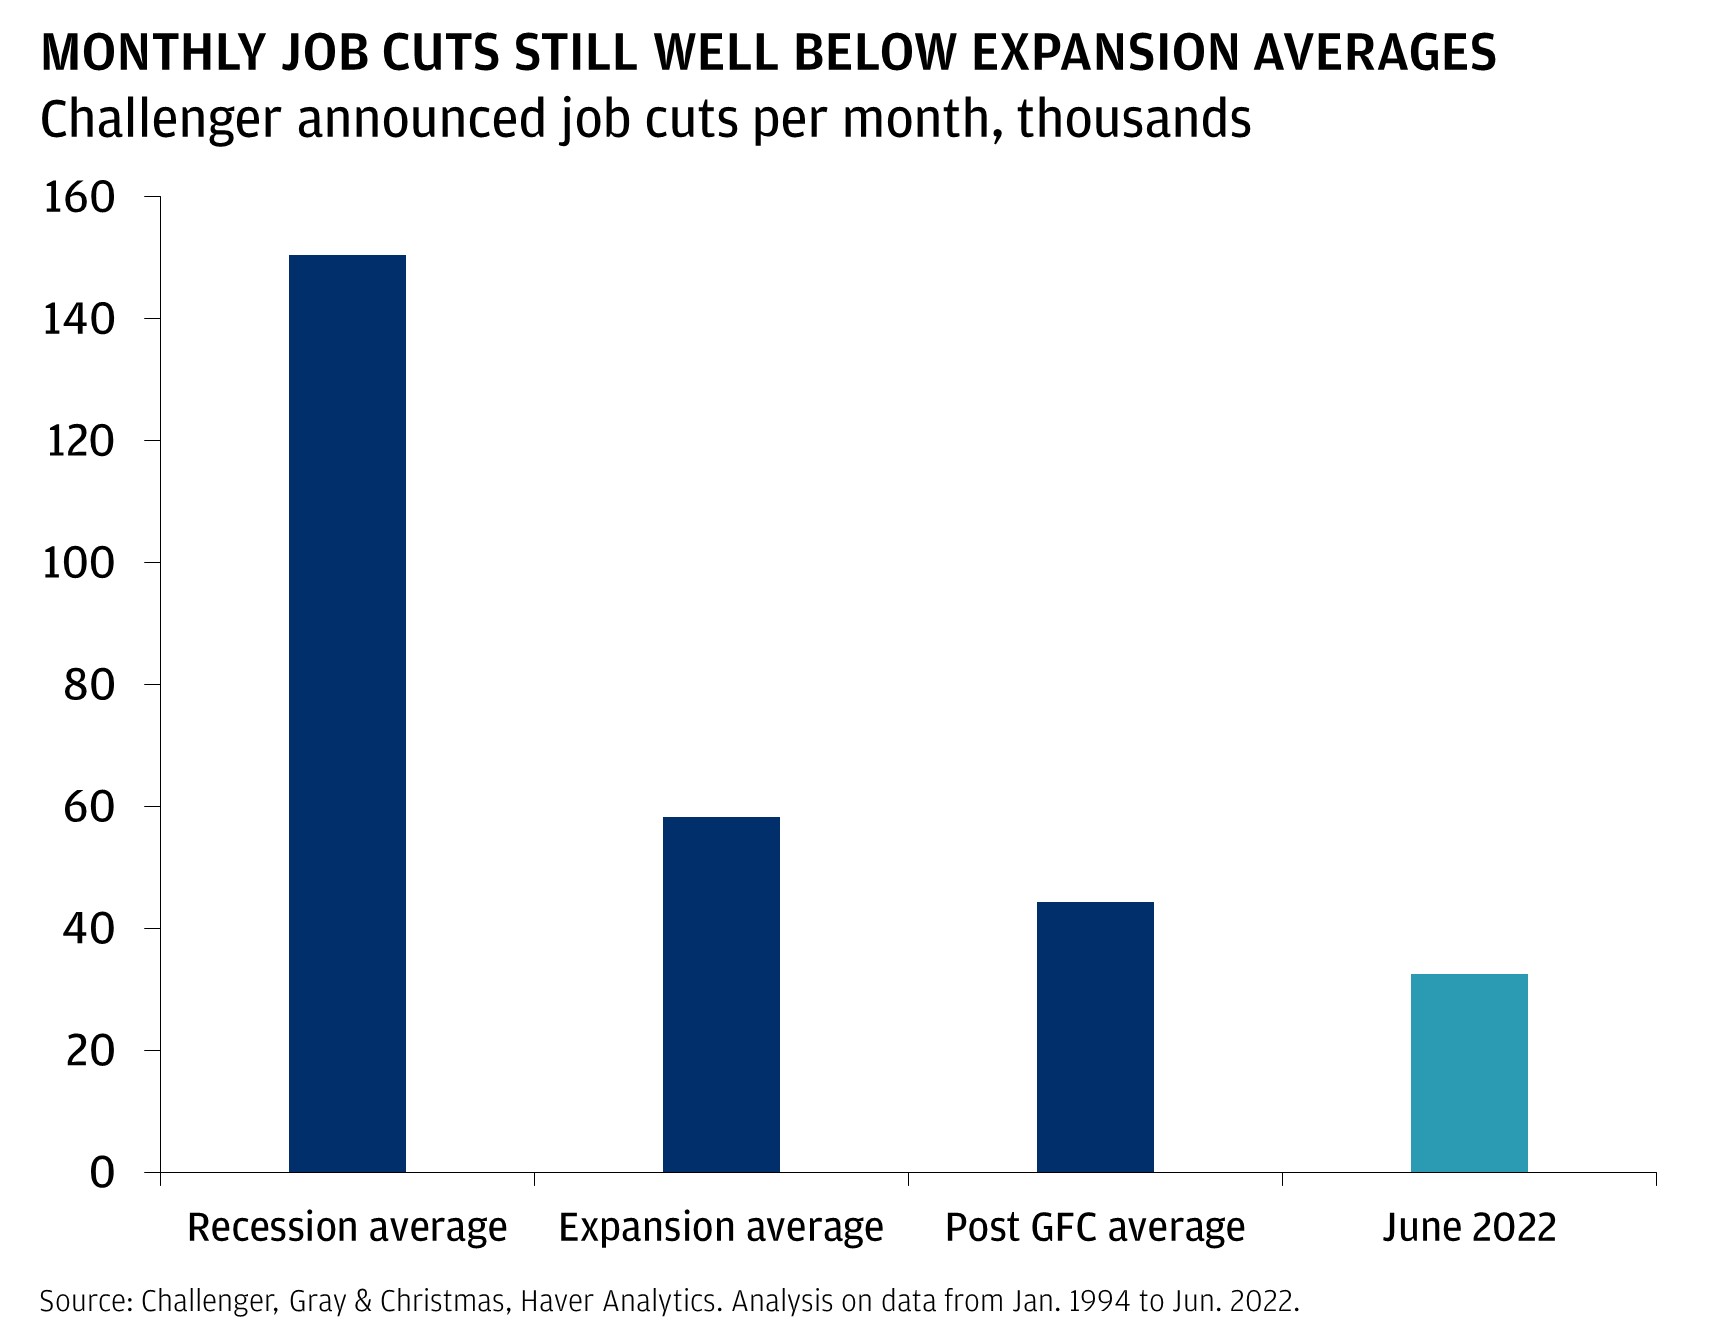 This chart shows the Challenger survey announced job cuts per month in the average recession between 1994 and 2022.